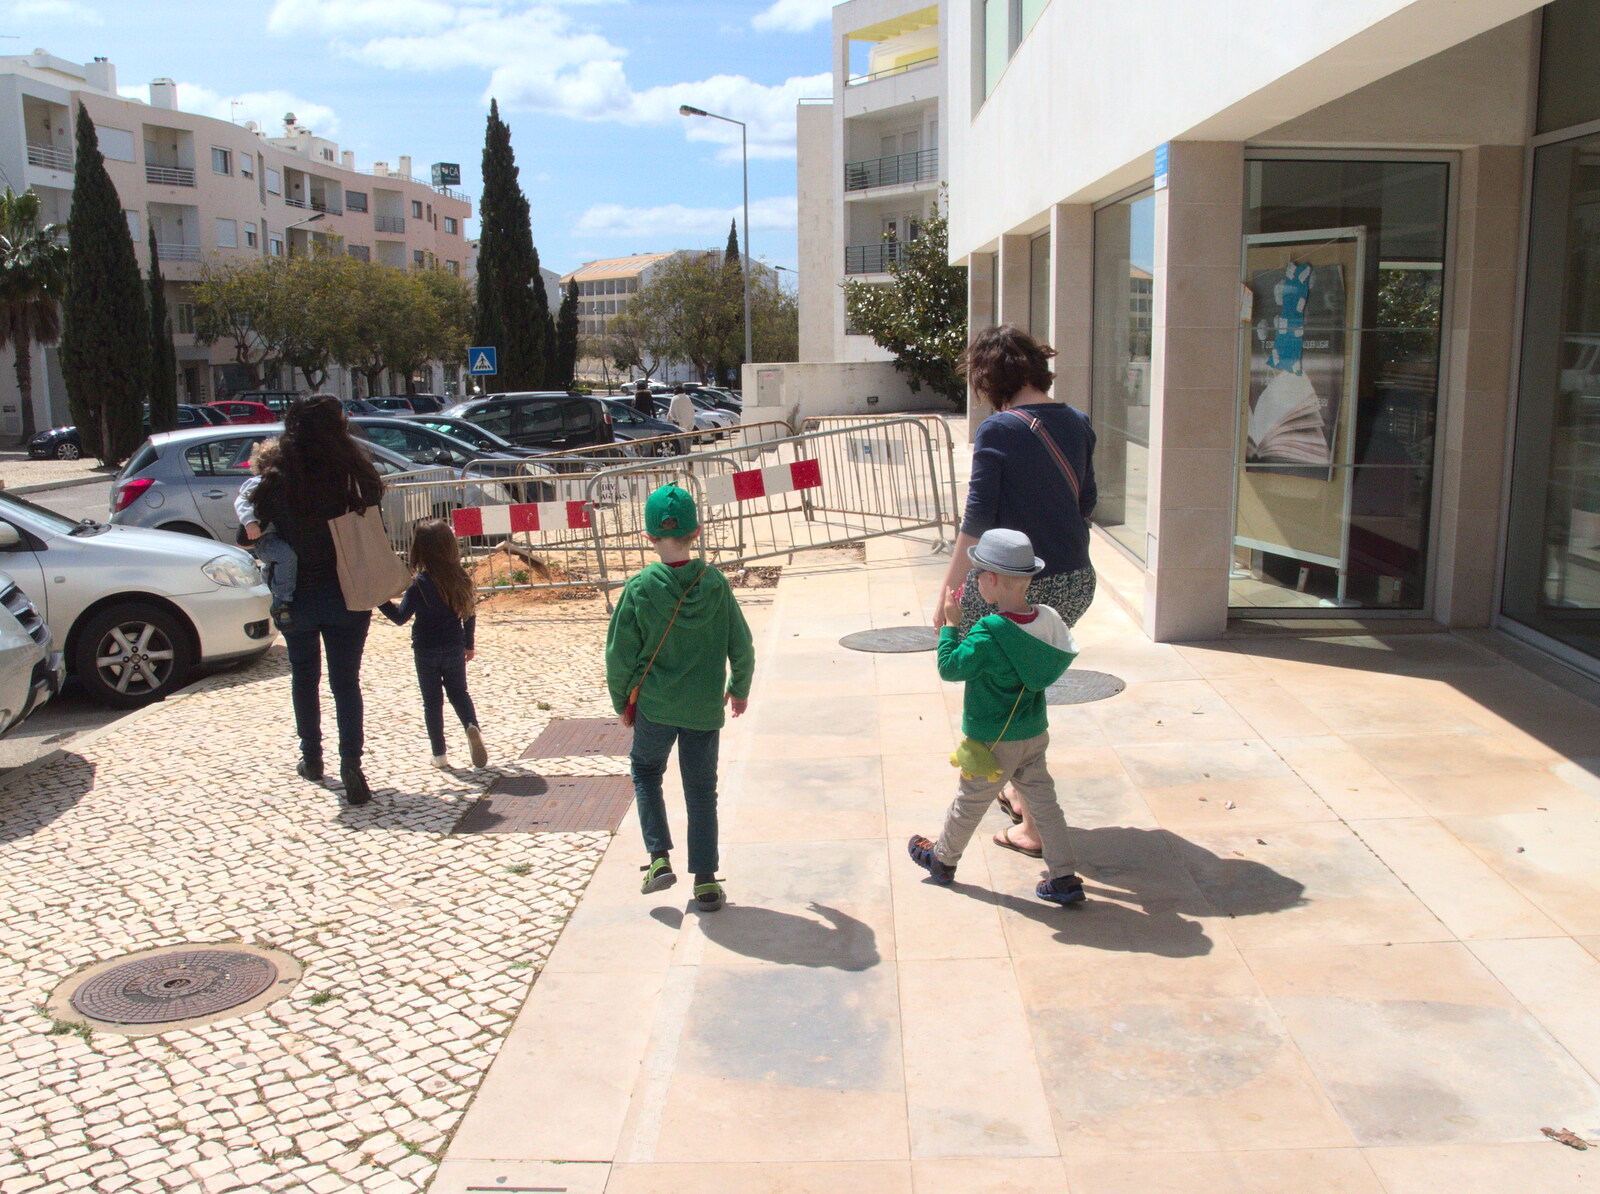 We head out of the library from A Trip to Albufeira: The Hotel Paraiso, Portugal - 3rd April 2016